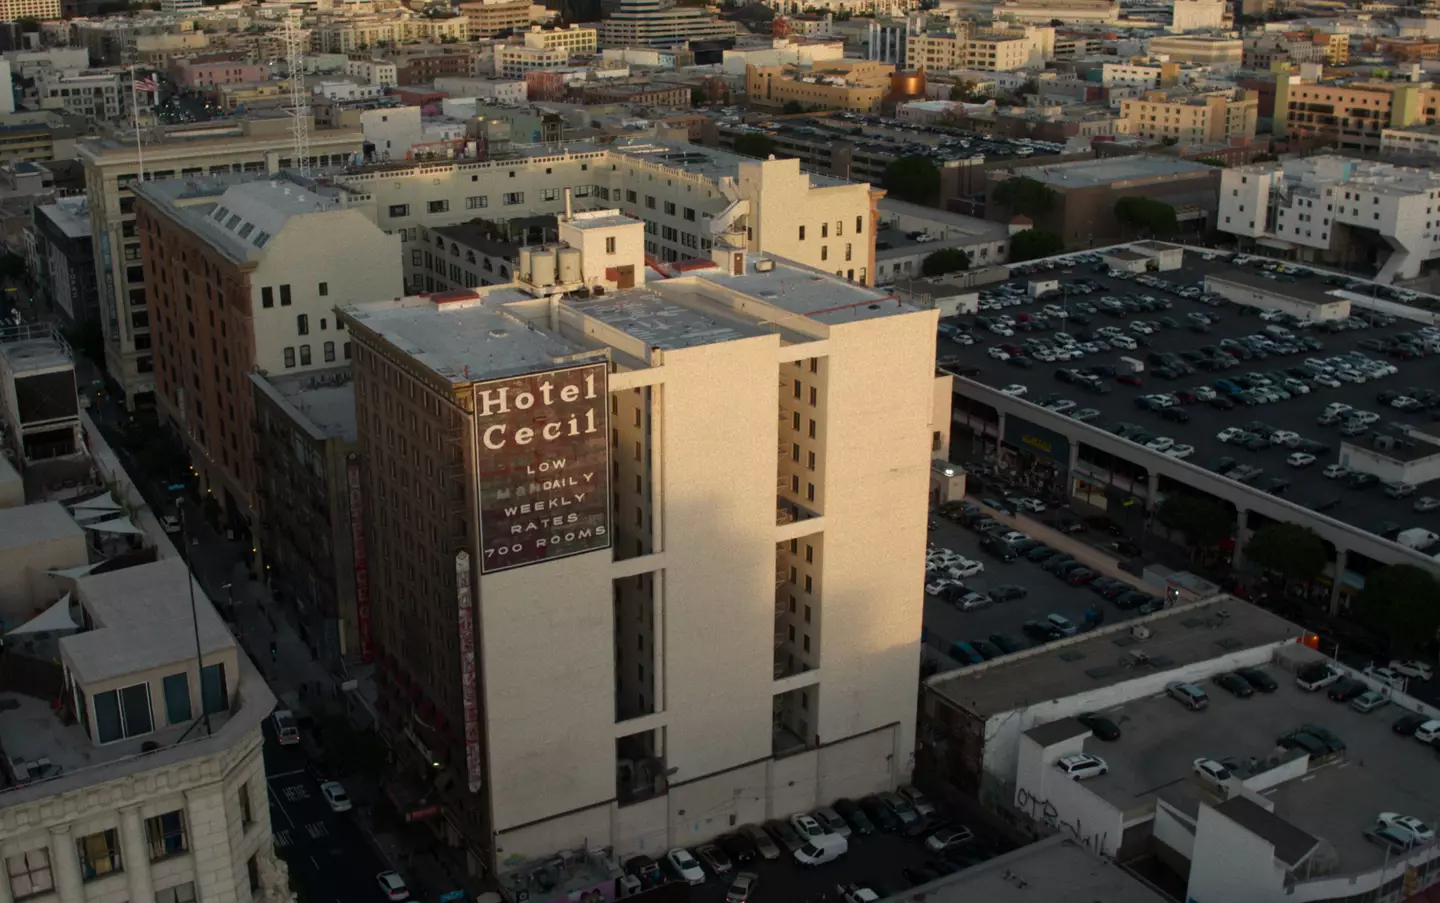 The Cecil Hotel featured in a true crime documentary that freaked out millions.